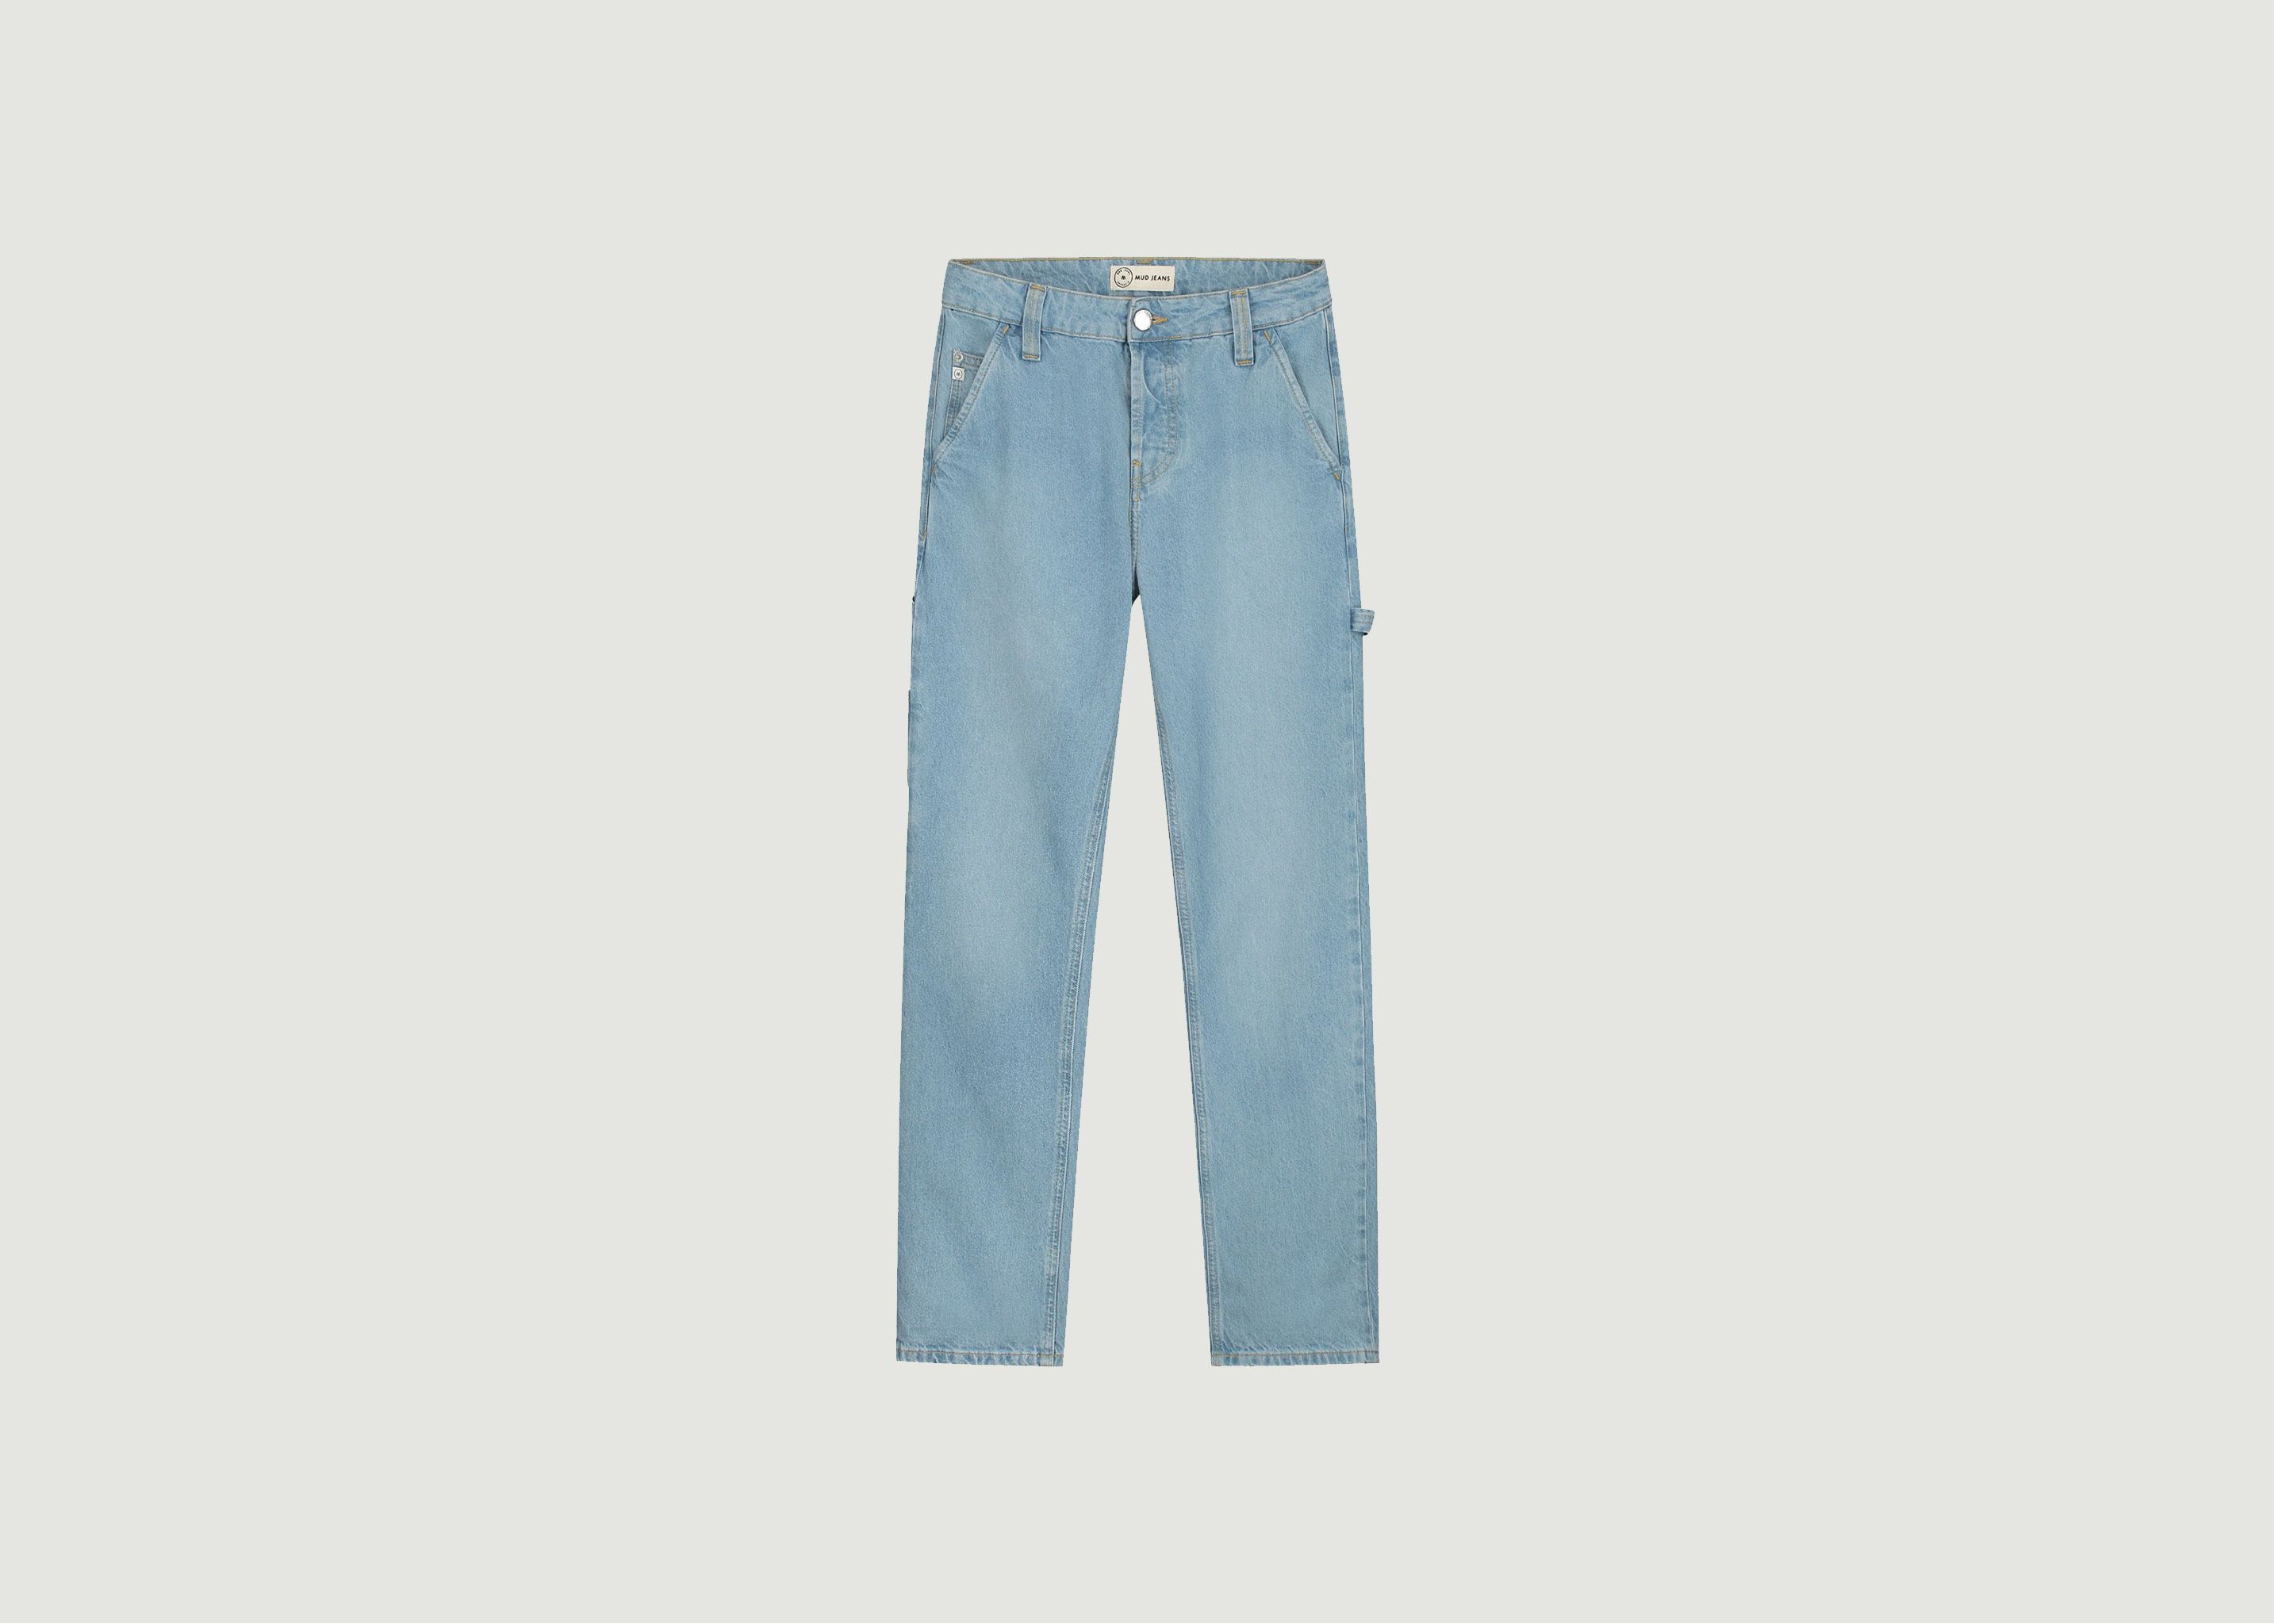 Jean Will Works - Mud Jeans